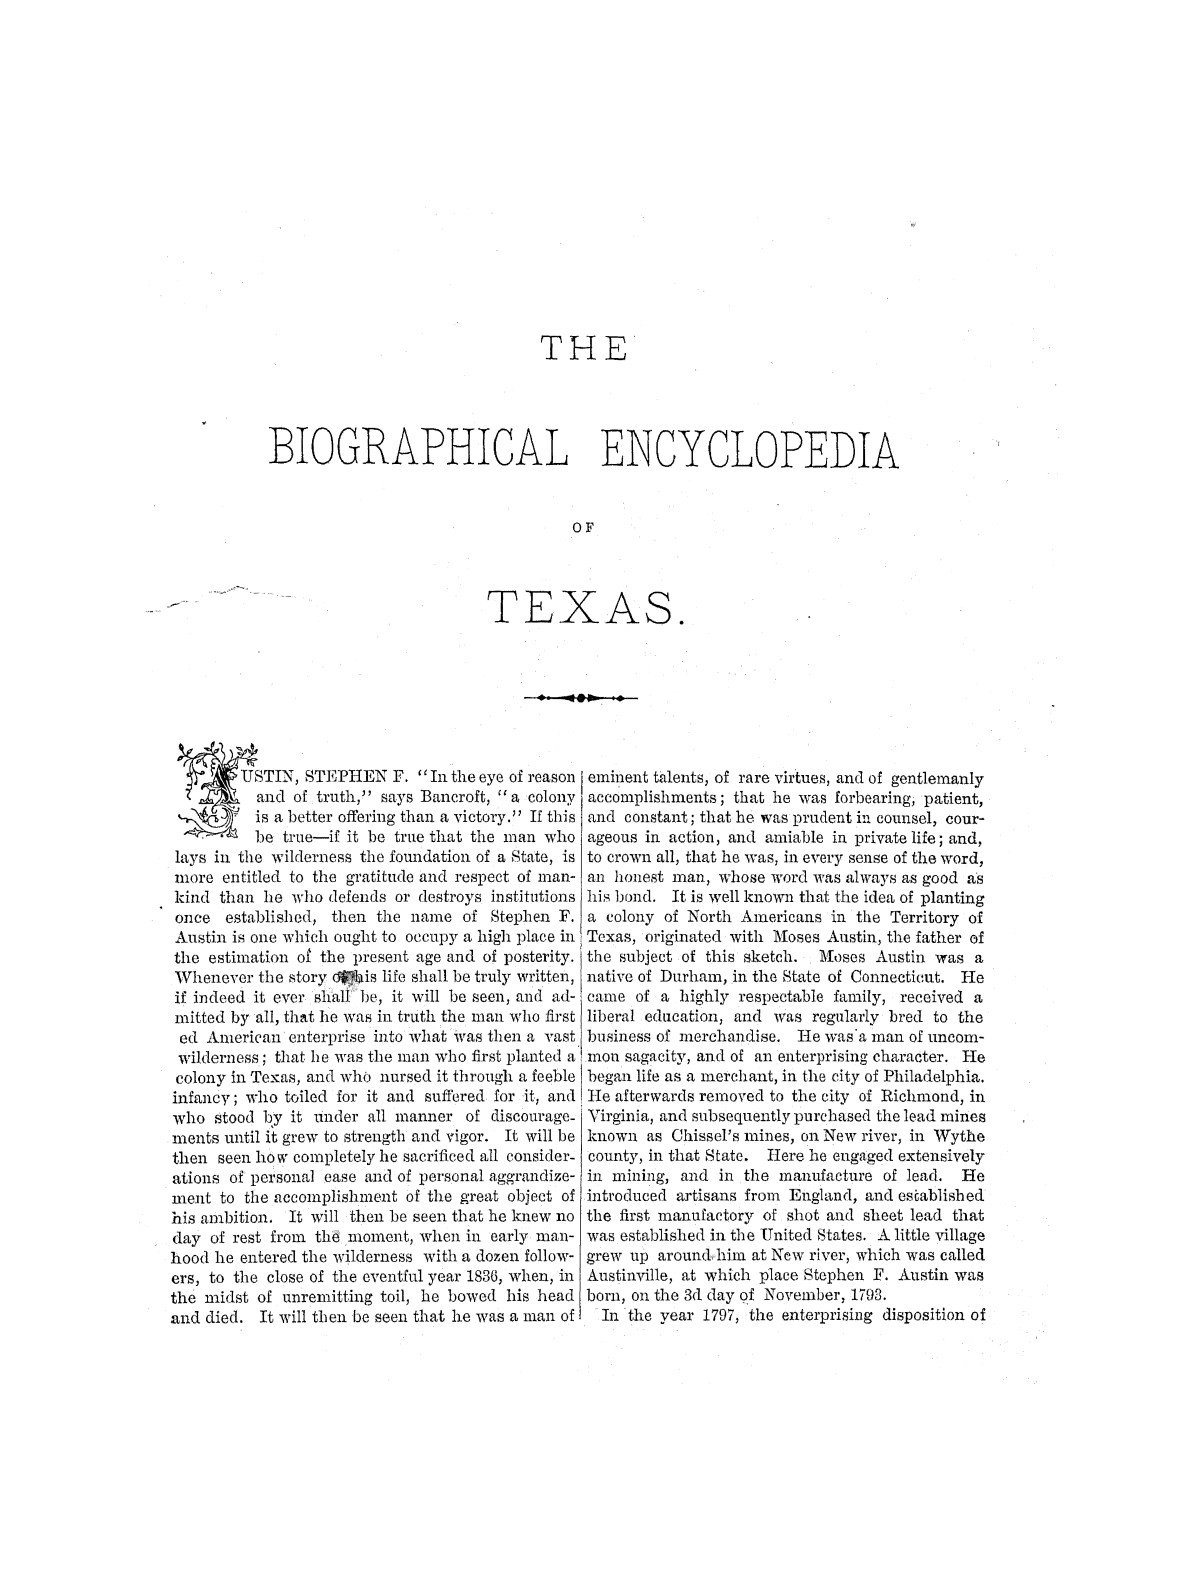 Biographical Encyclopedia of Texas
                                                
                                                    [Sequence #]: 5 of 372
                                                